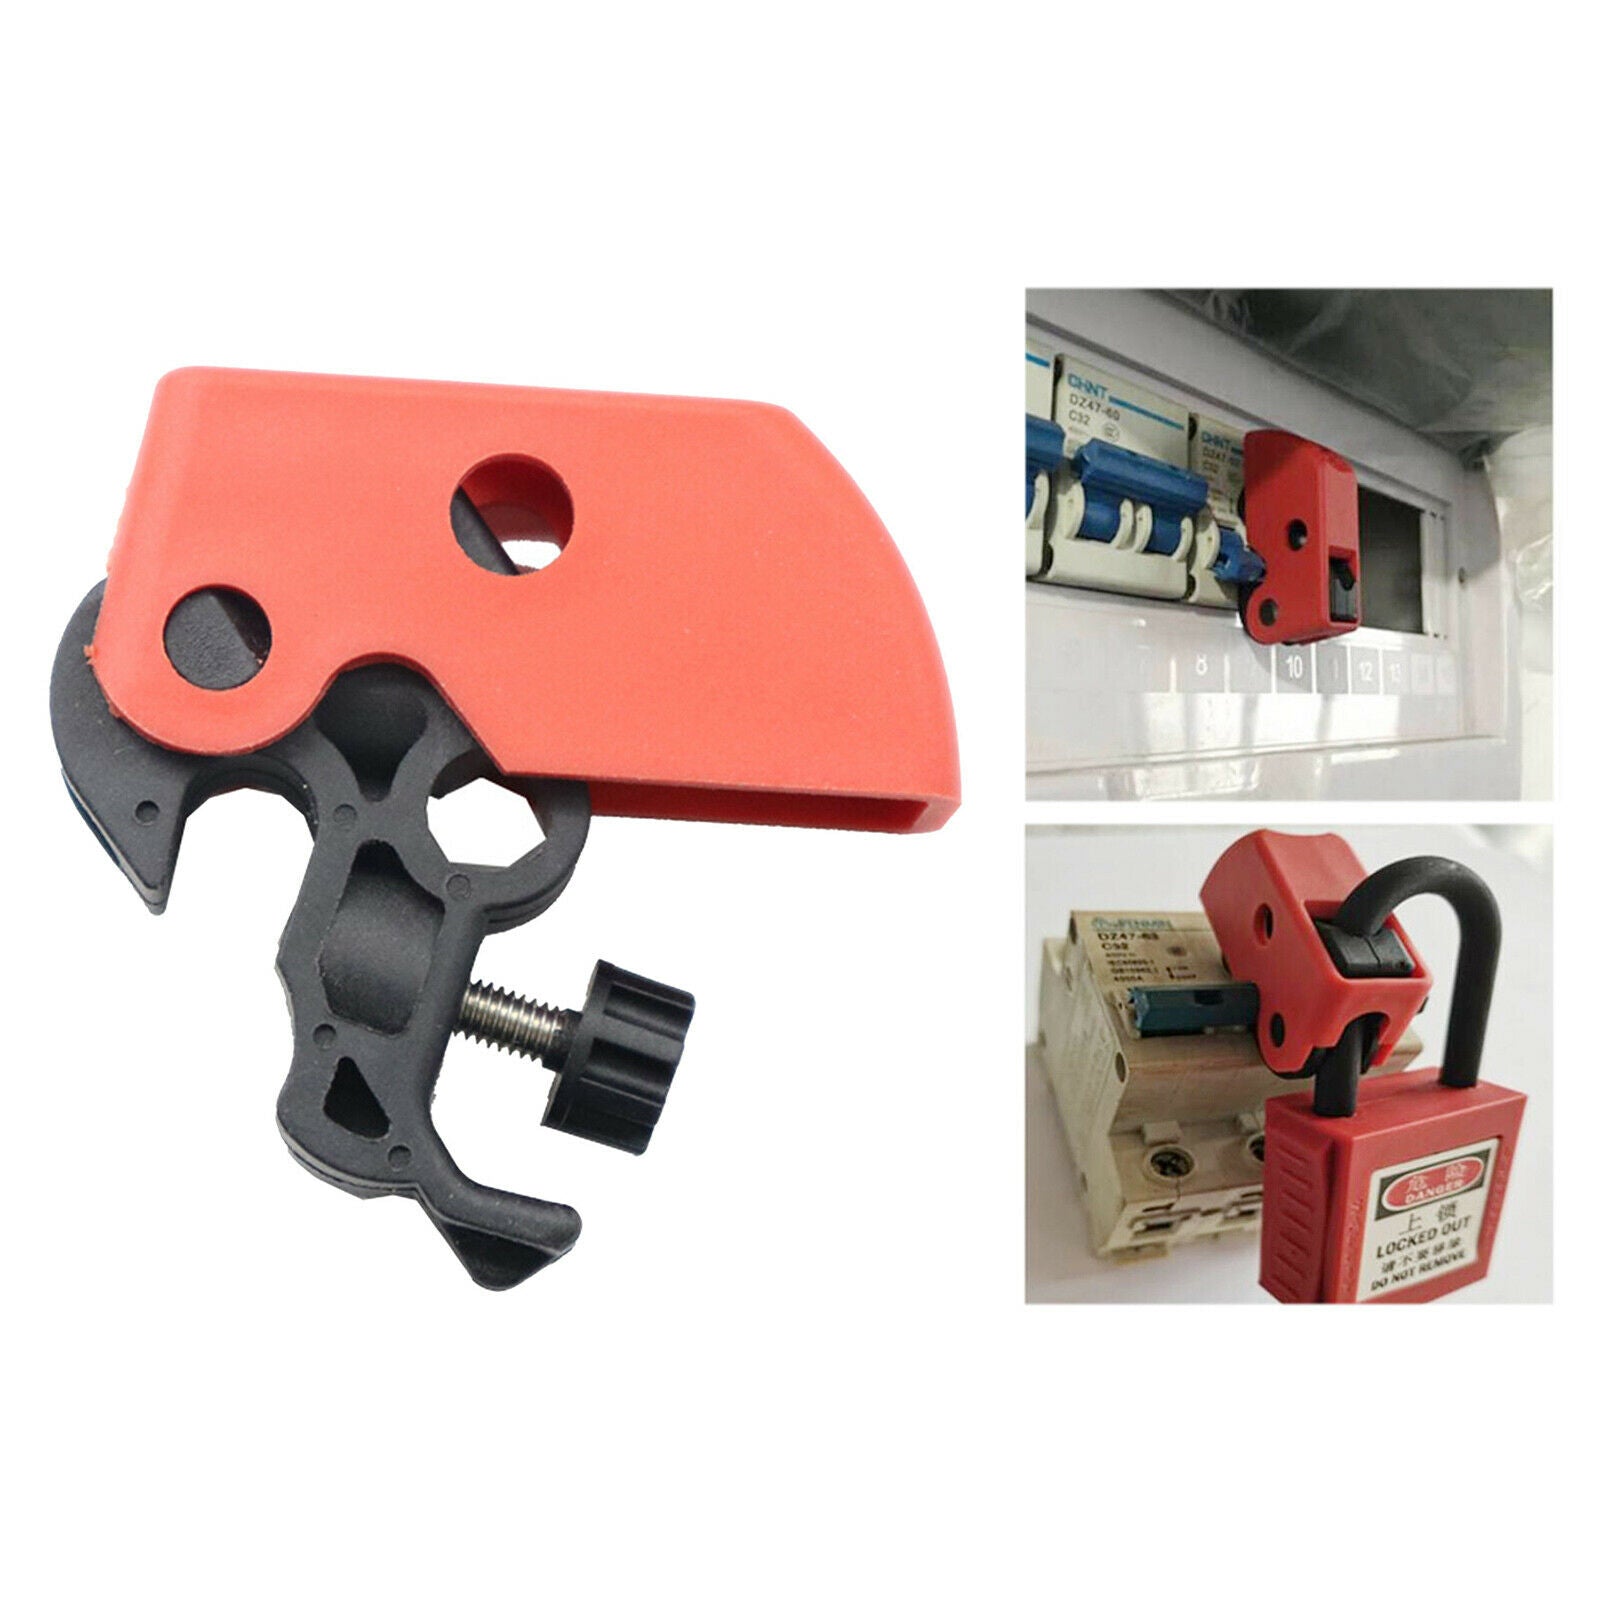 Universal Nylon Circuit Breaker Lockout Lockout Device Screw Safety Red